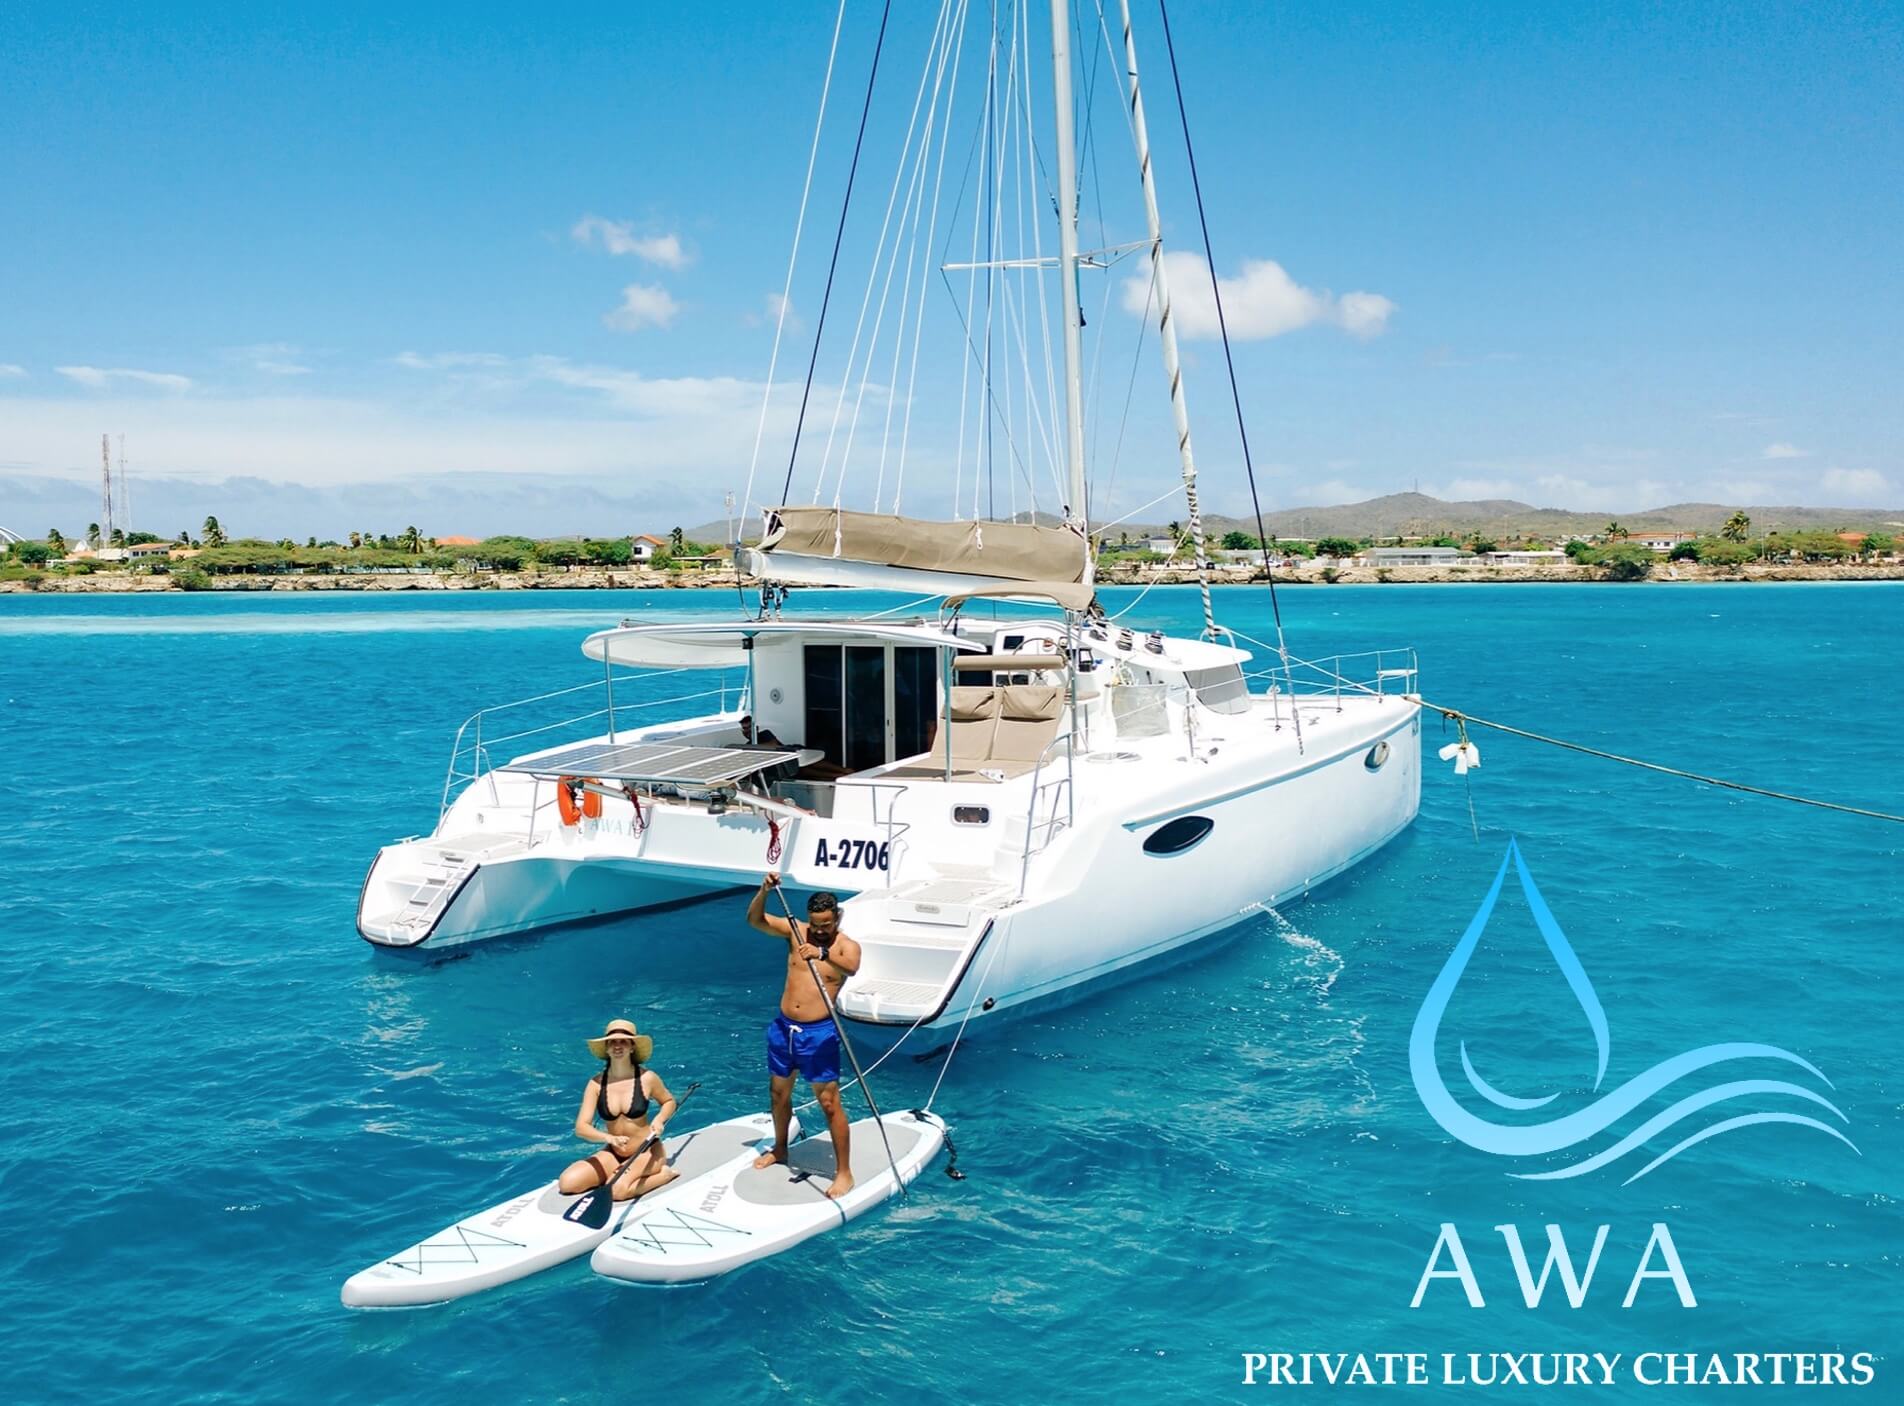 FULL DAY PRIVATE BY AWA Aruba - vacaystore.com